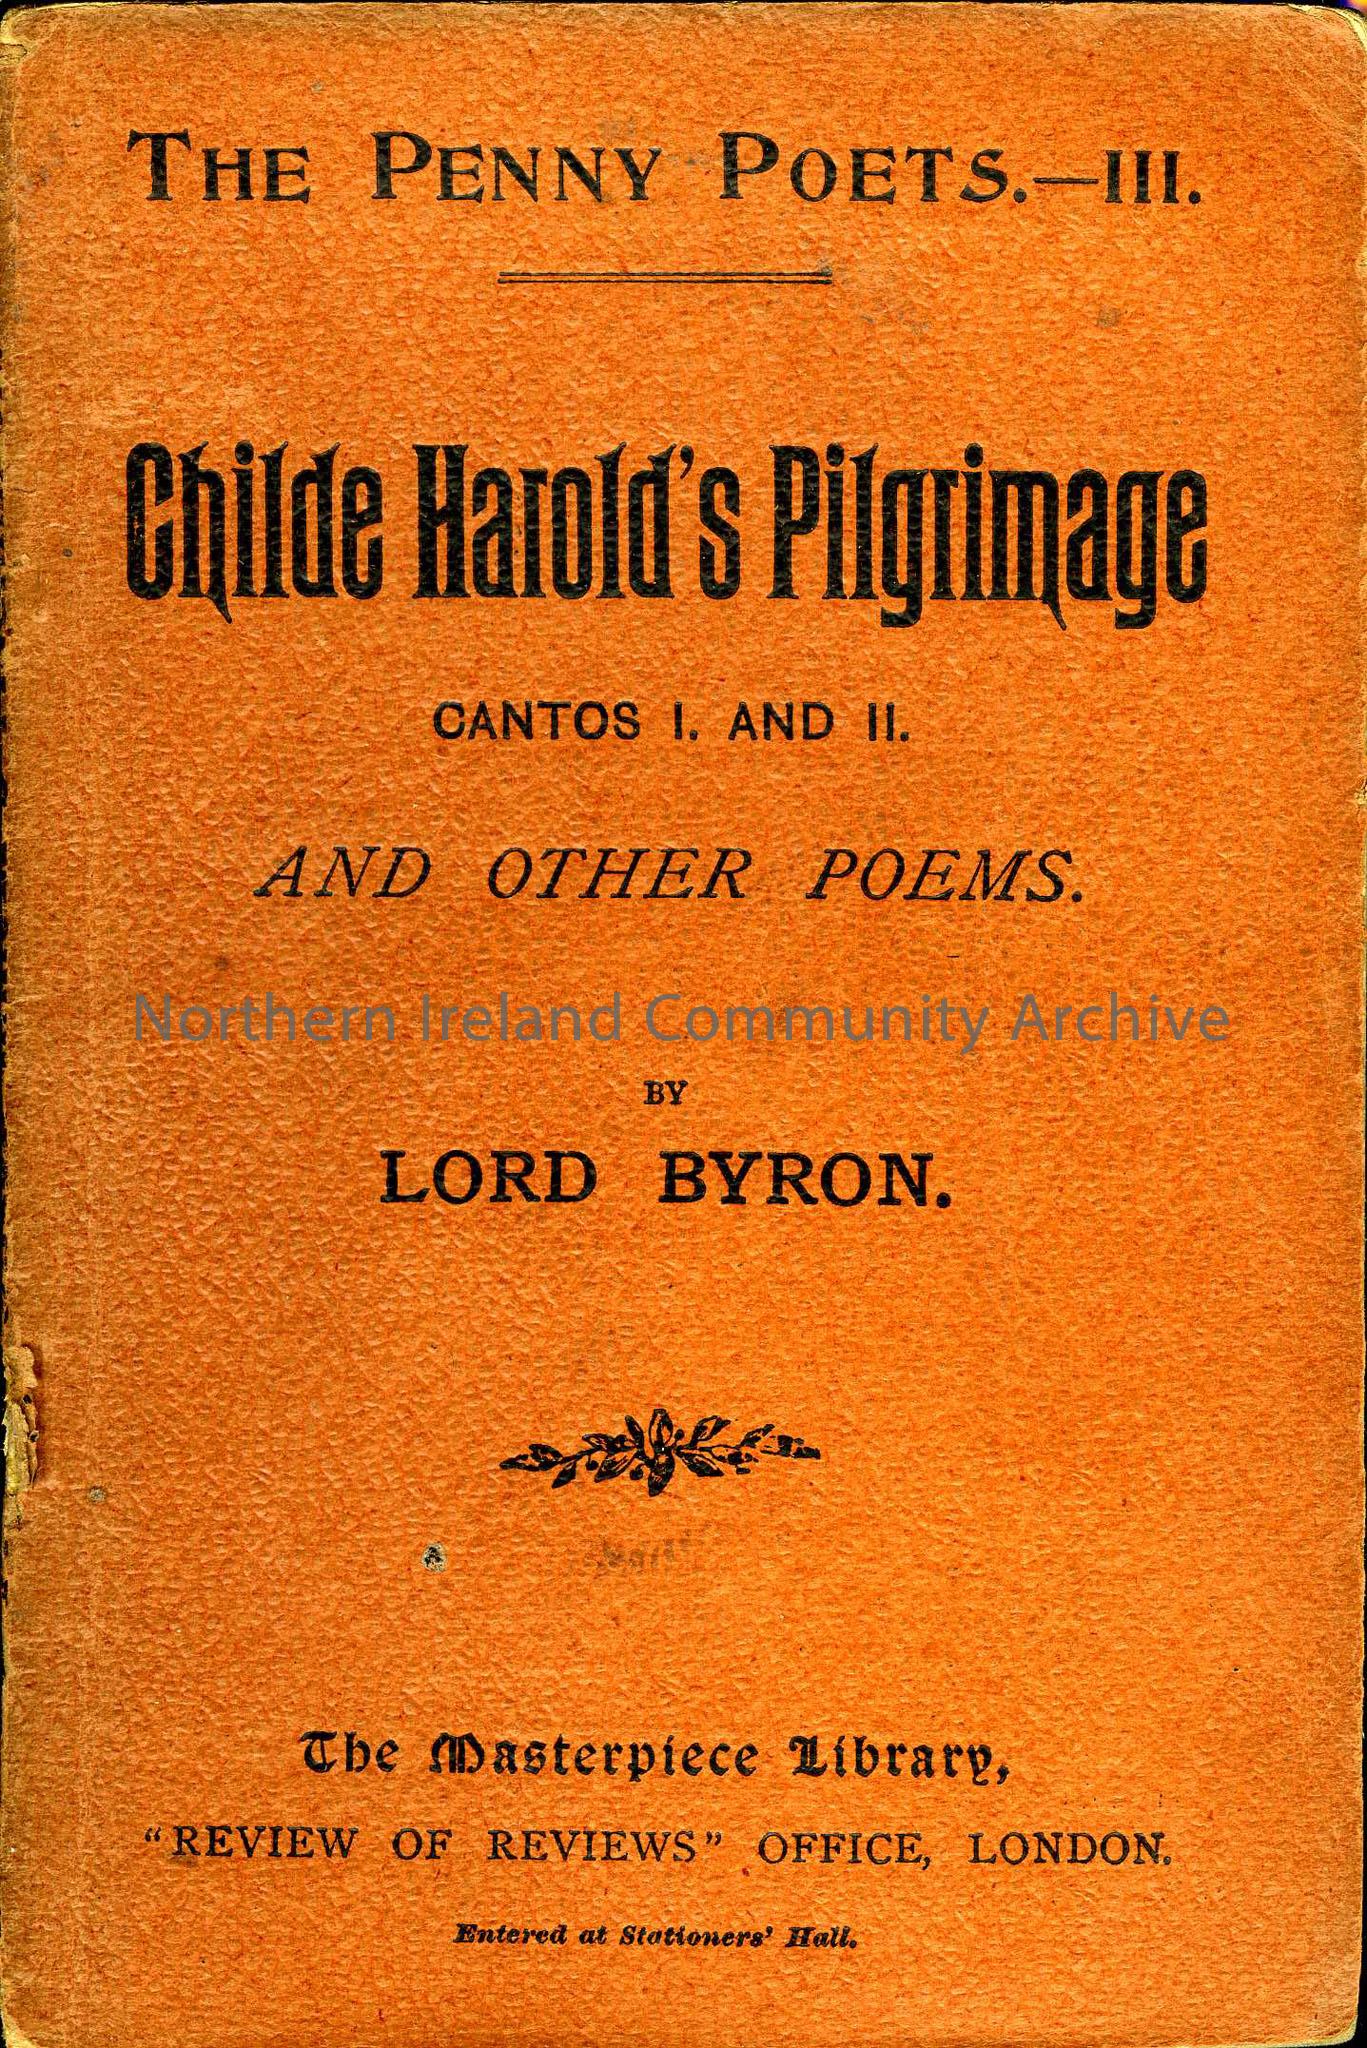 Childe Harold’s Pilgrimage Cantos 1 and 2 and other poems by Lord Byron